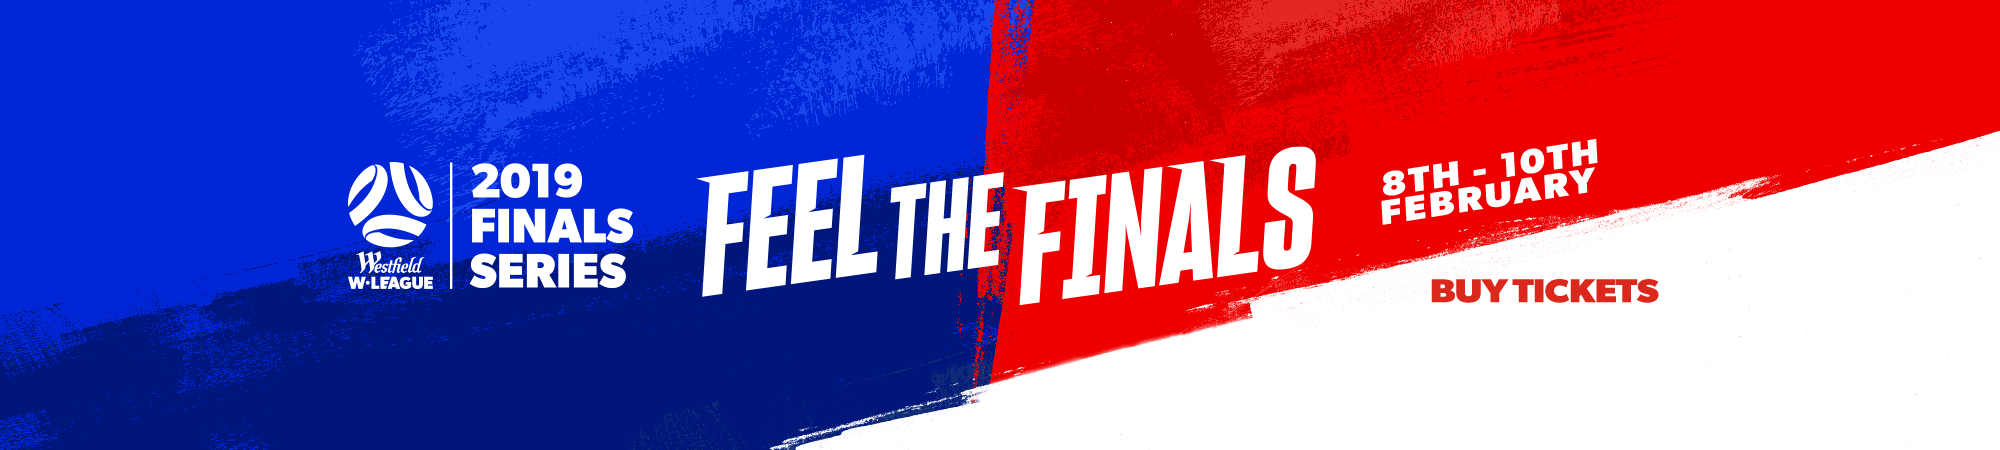 Feel The Finals Banner